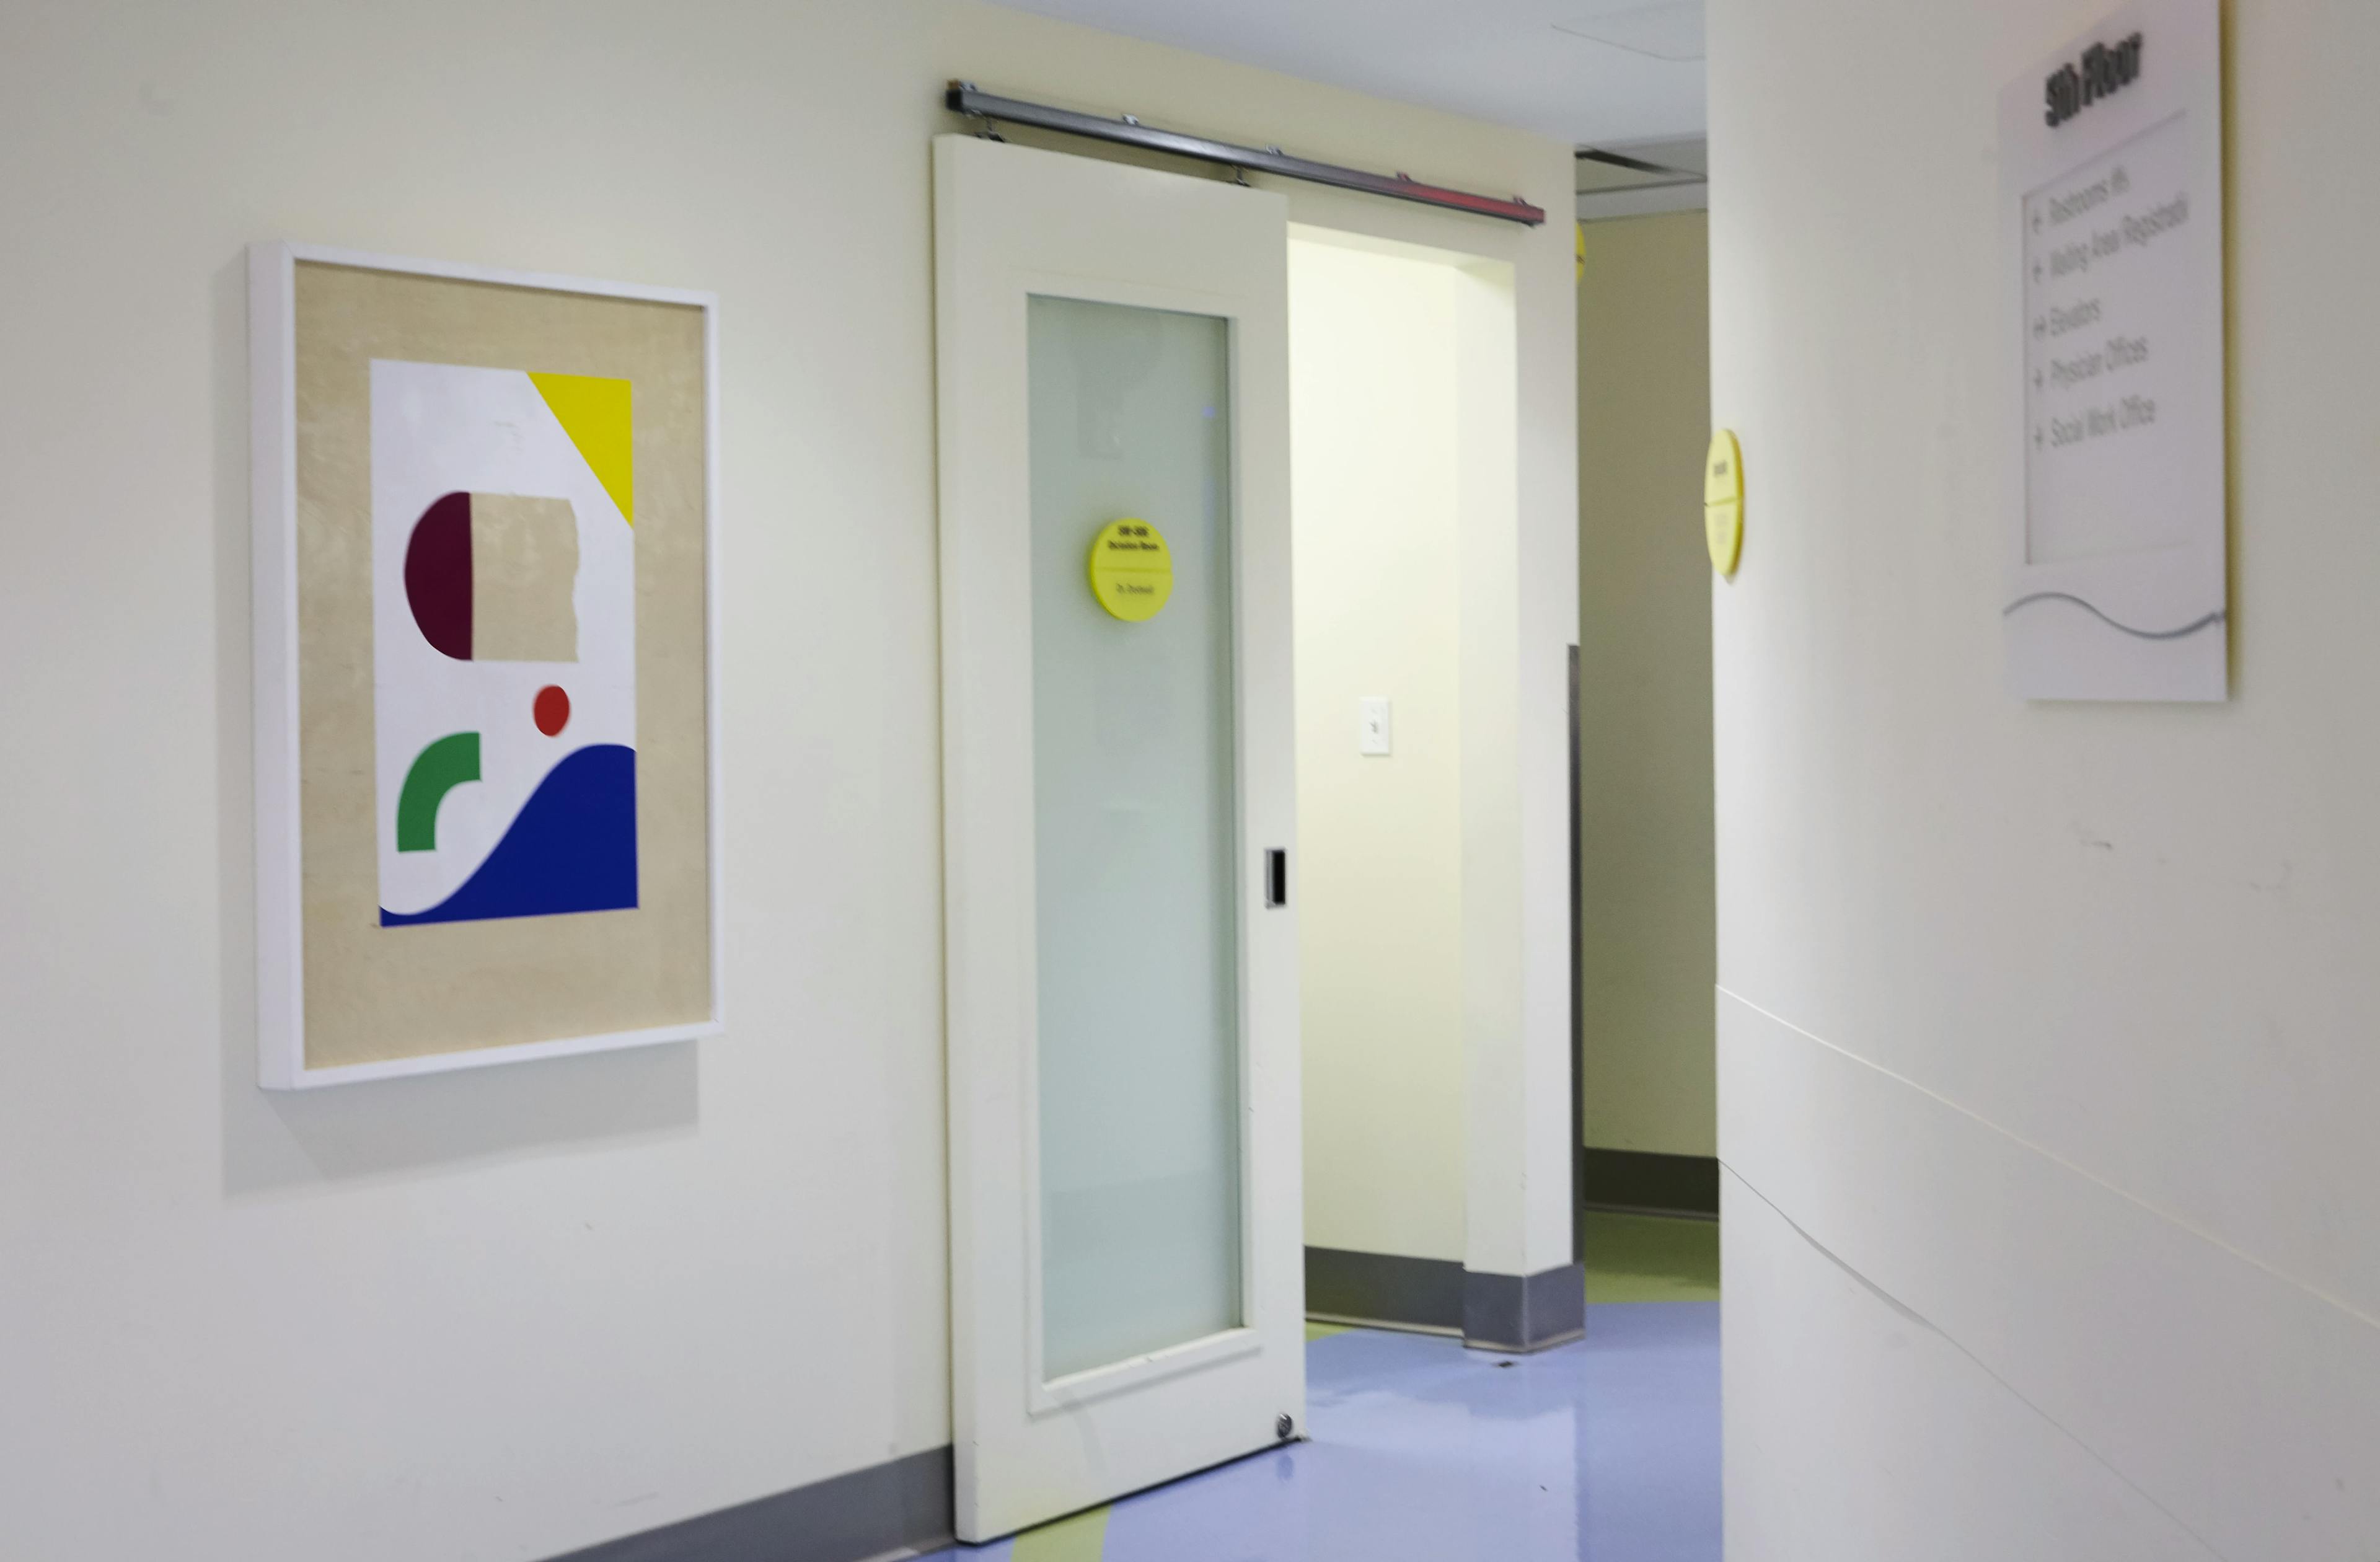 Framed, abstract artwork with geometric shapes installed on a white wall in a hospital corridor.